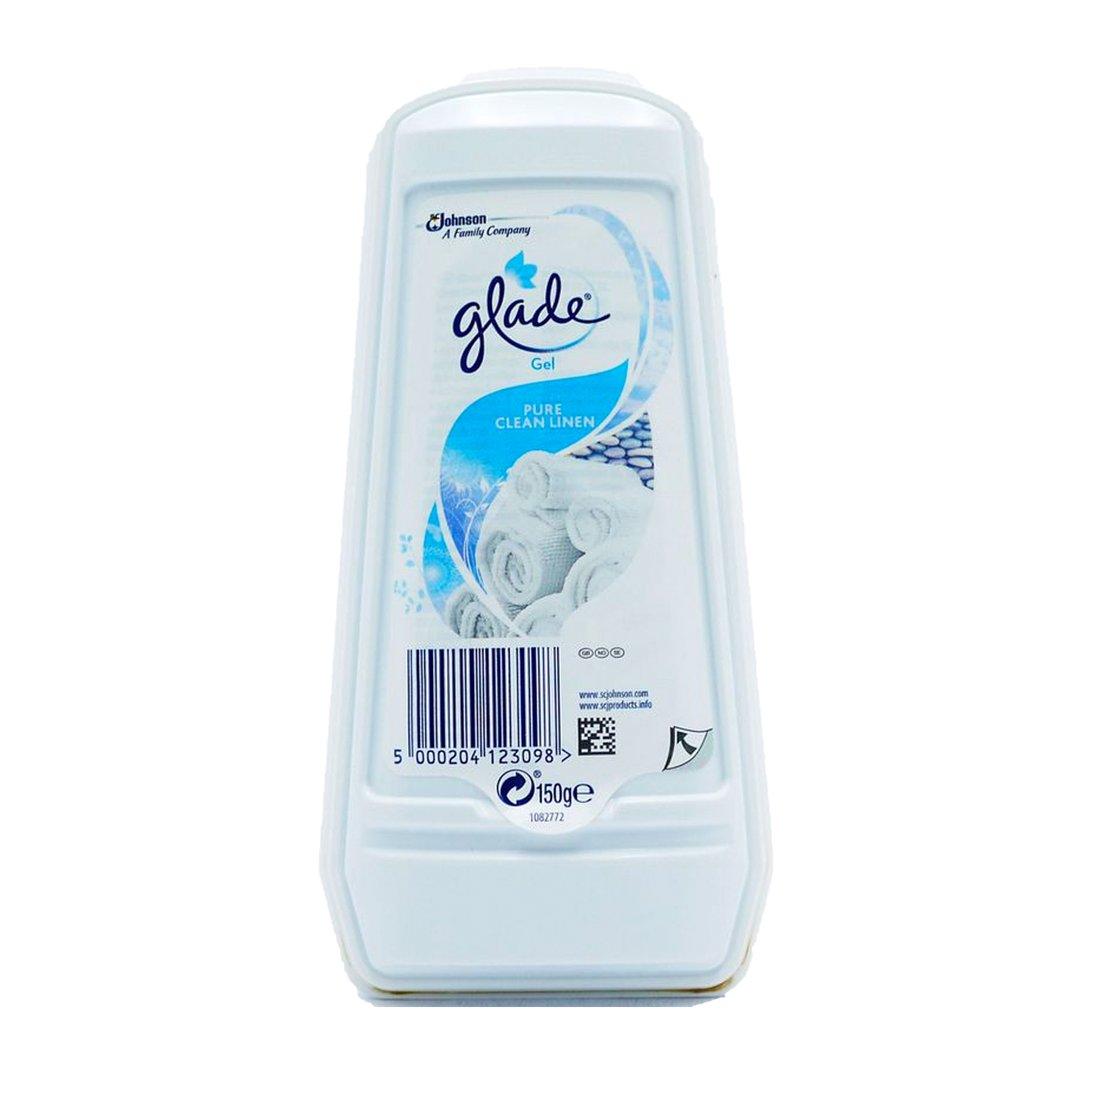 Glade Solid Gel Pure Clean Linen Air Freshener - 150g - Vending Superstore